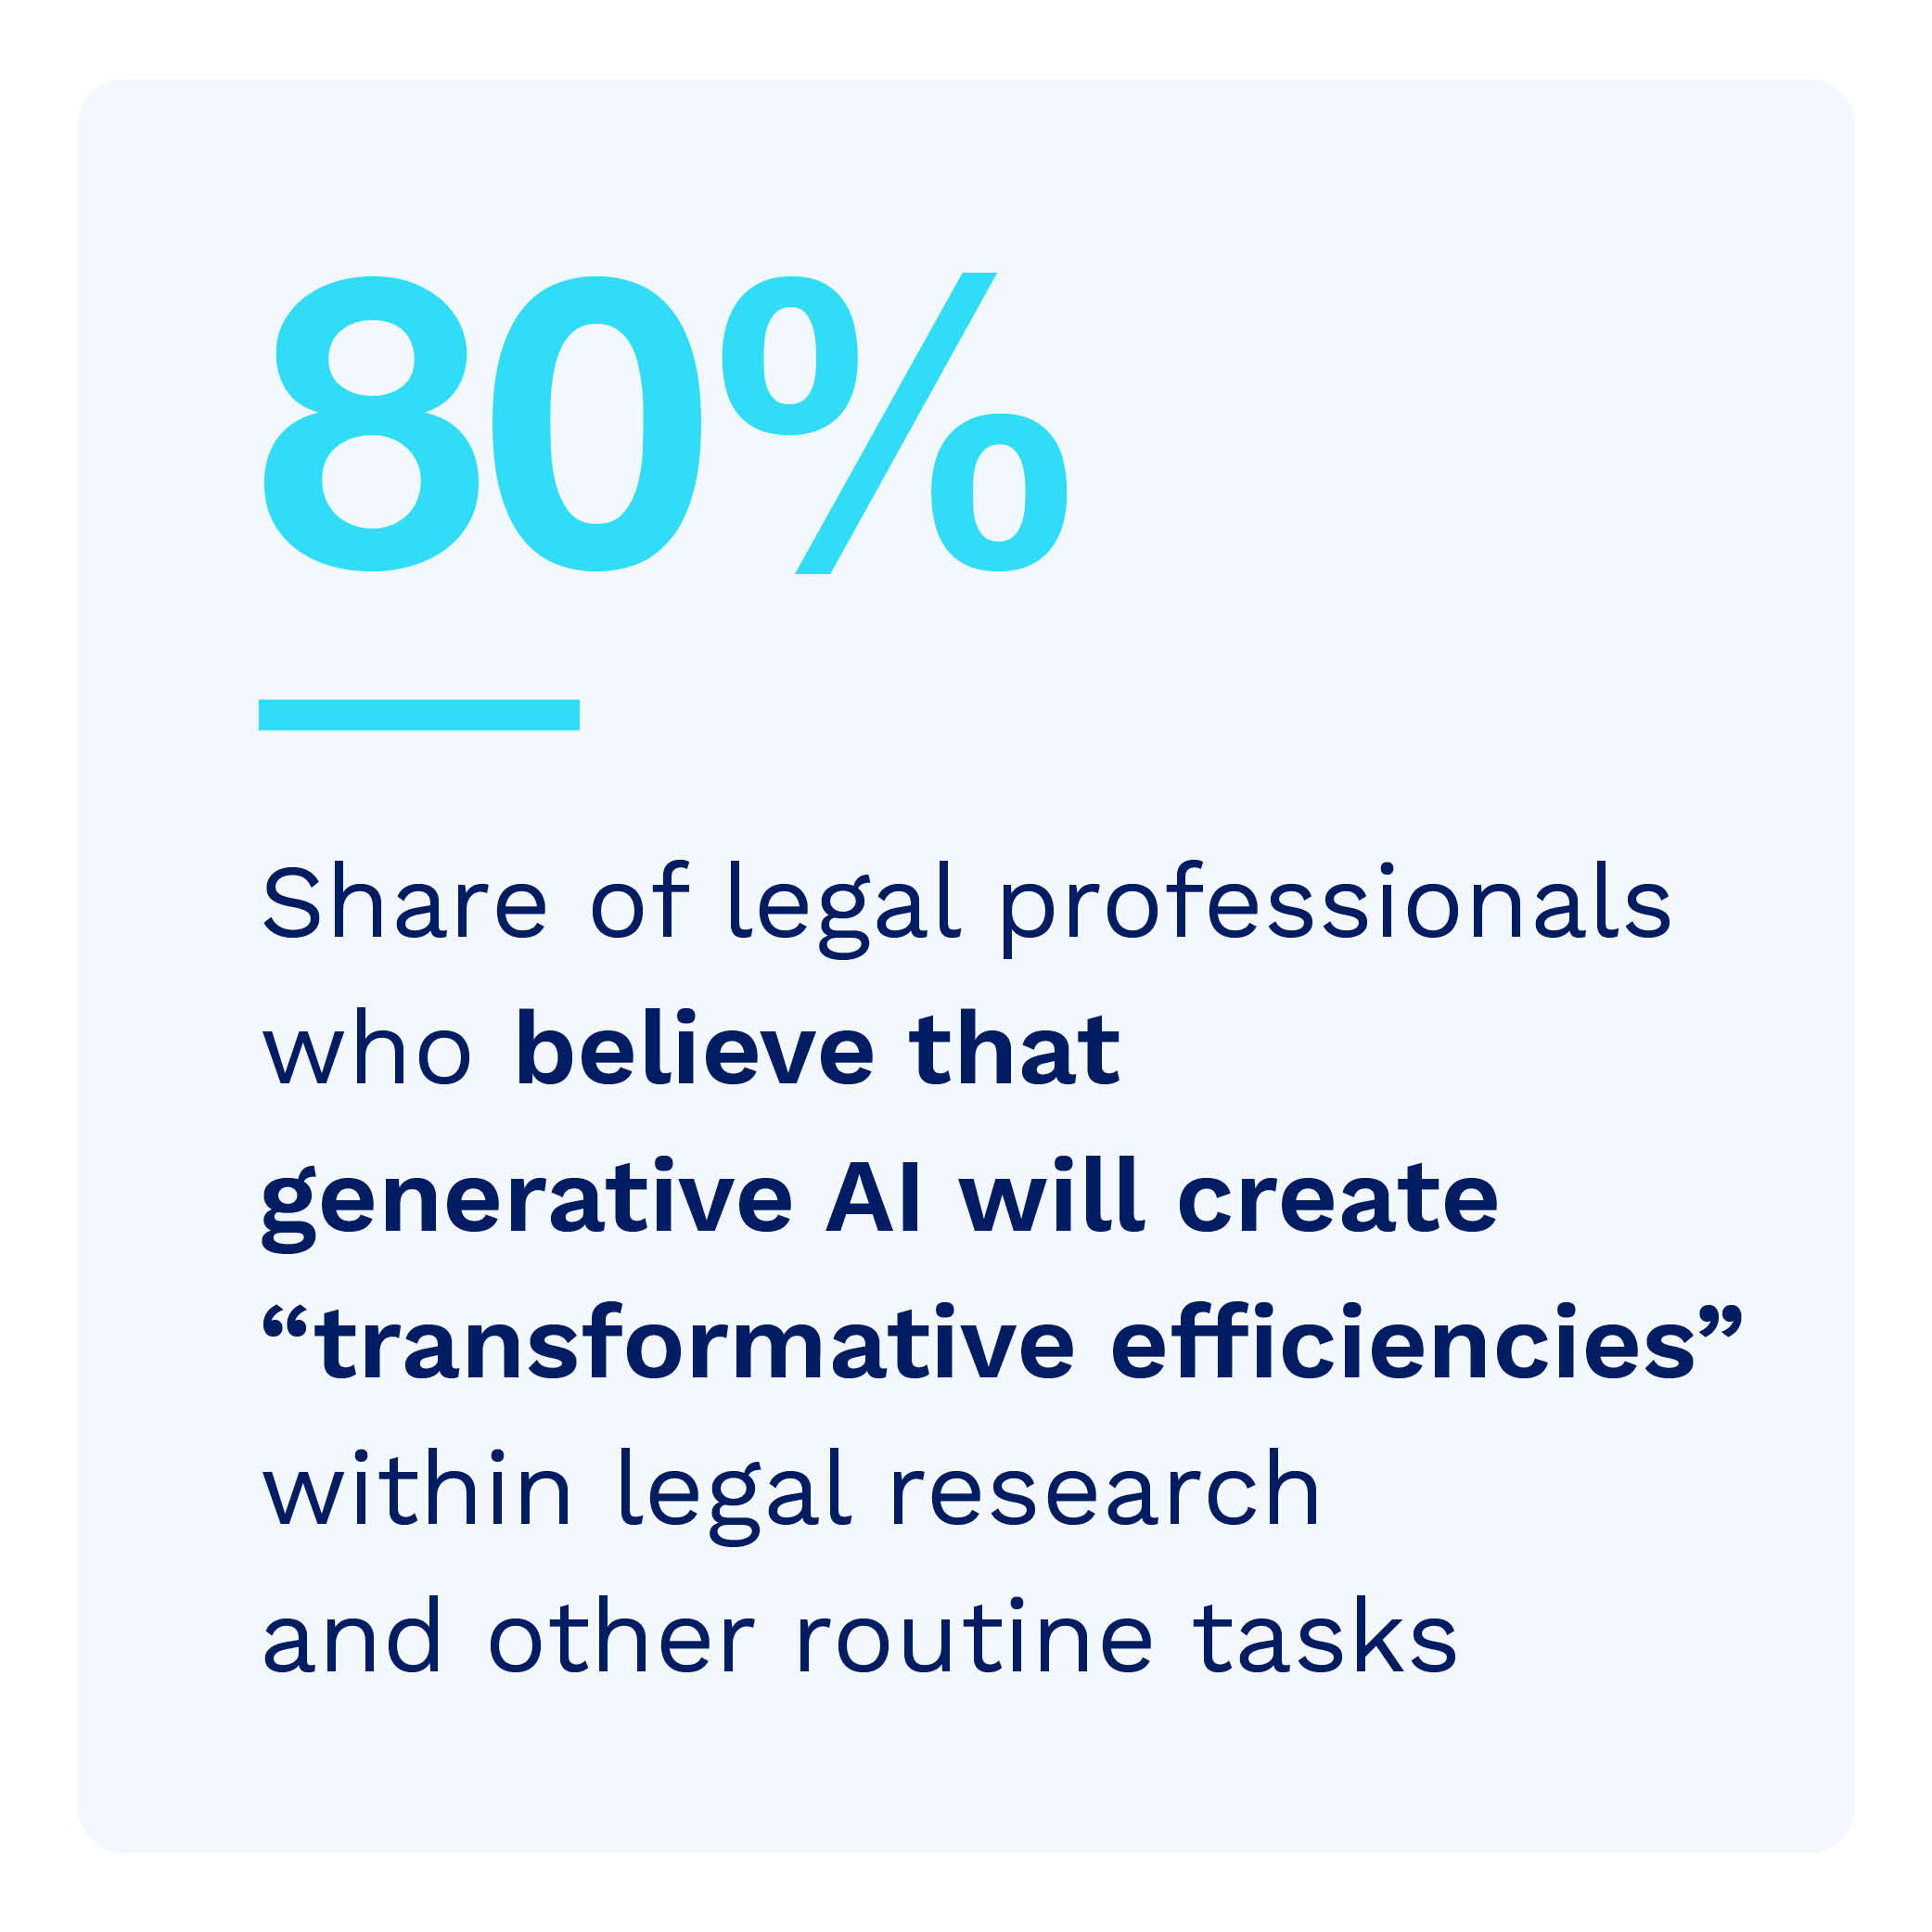 80%: Share of legal professionals who believe that generative AI will create “transformative efficiencies” within legal research and other routine tasks